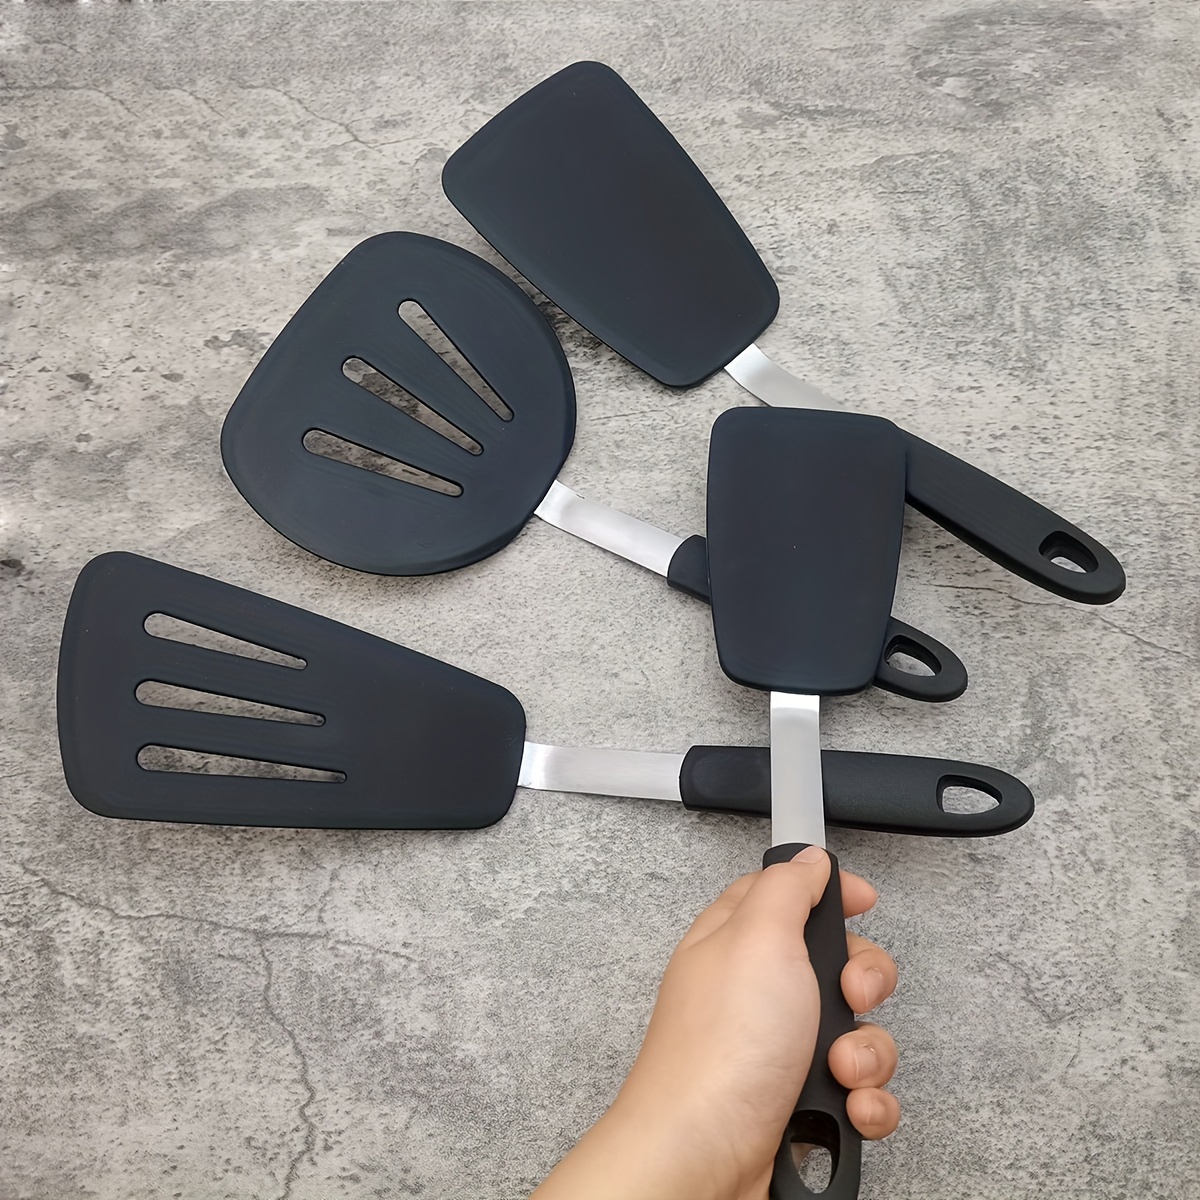 Silicone Rubber Spatula for Nonstick Cookware - Cooking Utensils Egg Spatula, Pancake Spatula Utensils -BPA Free Kitchen Utensil with Heat Resistant